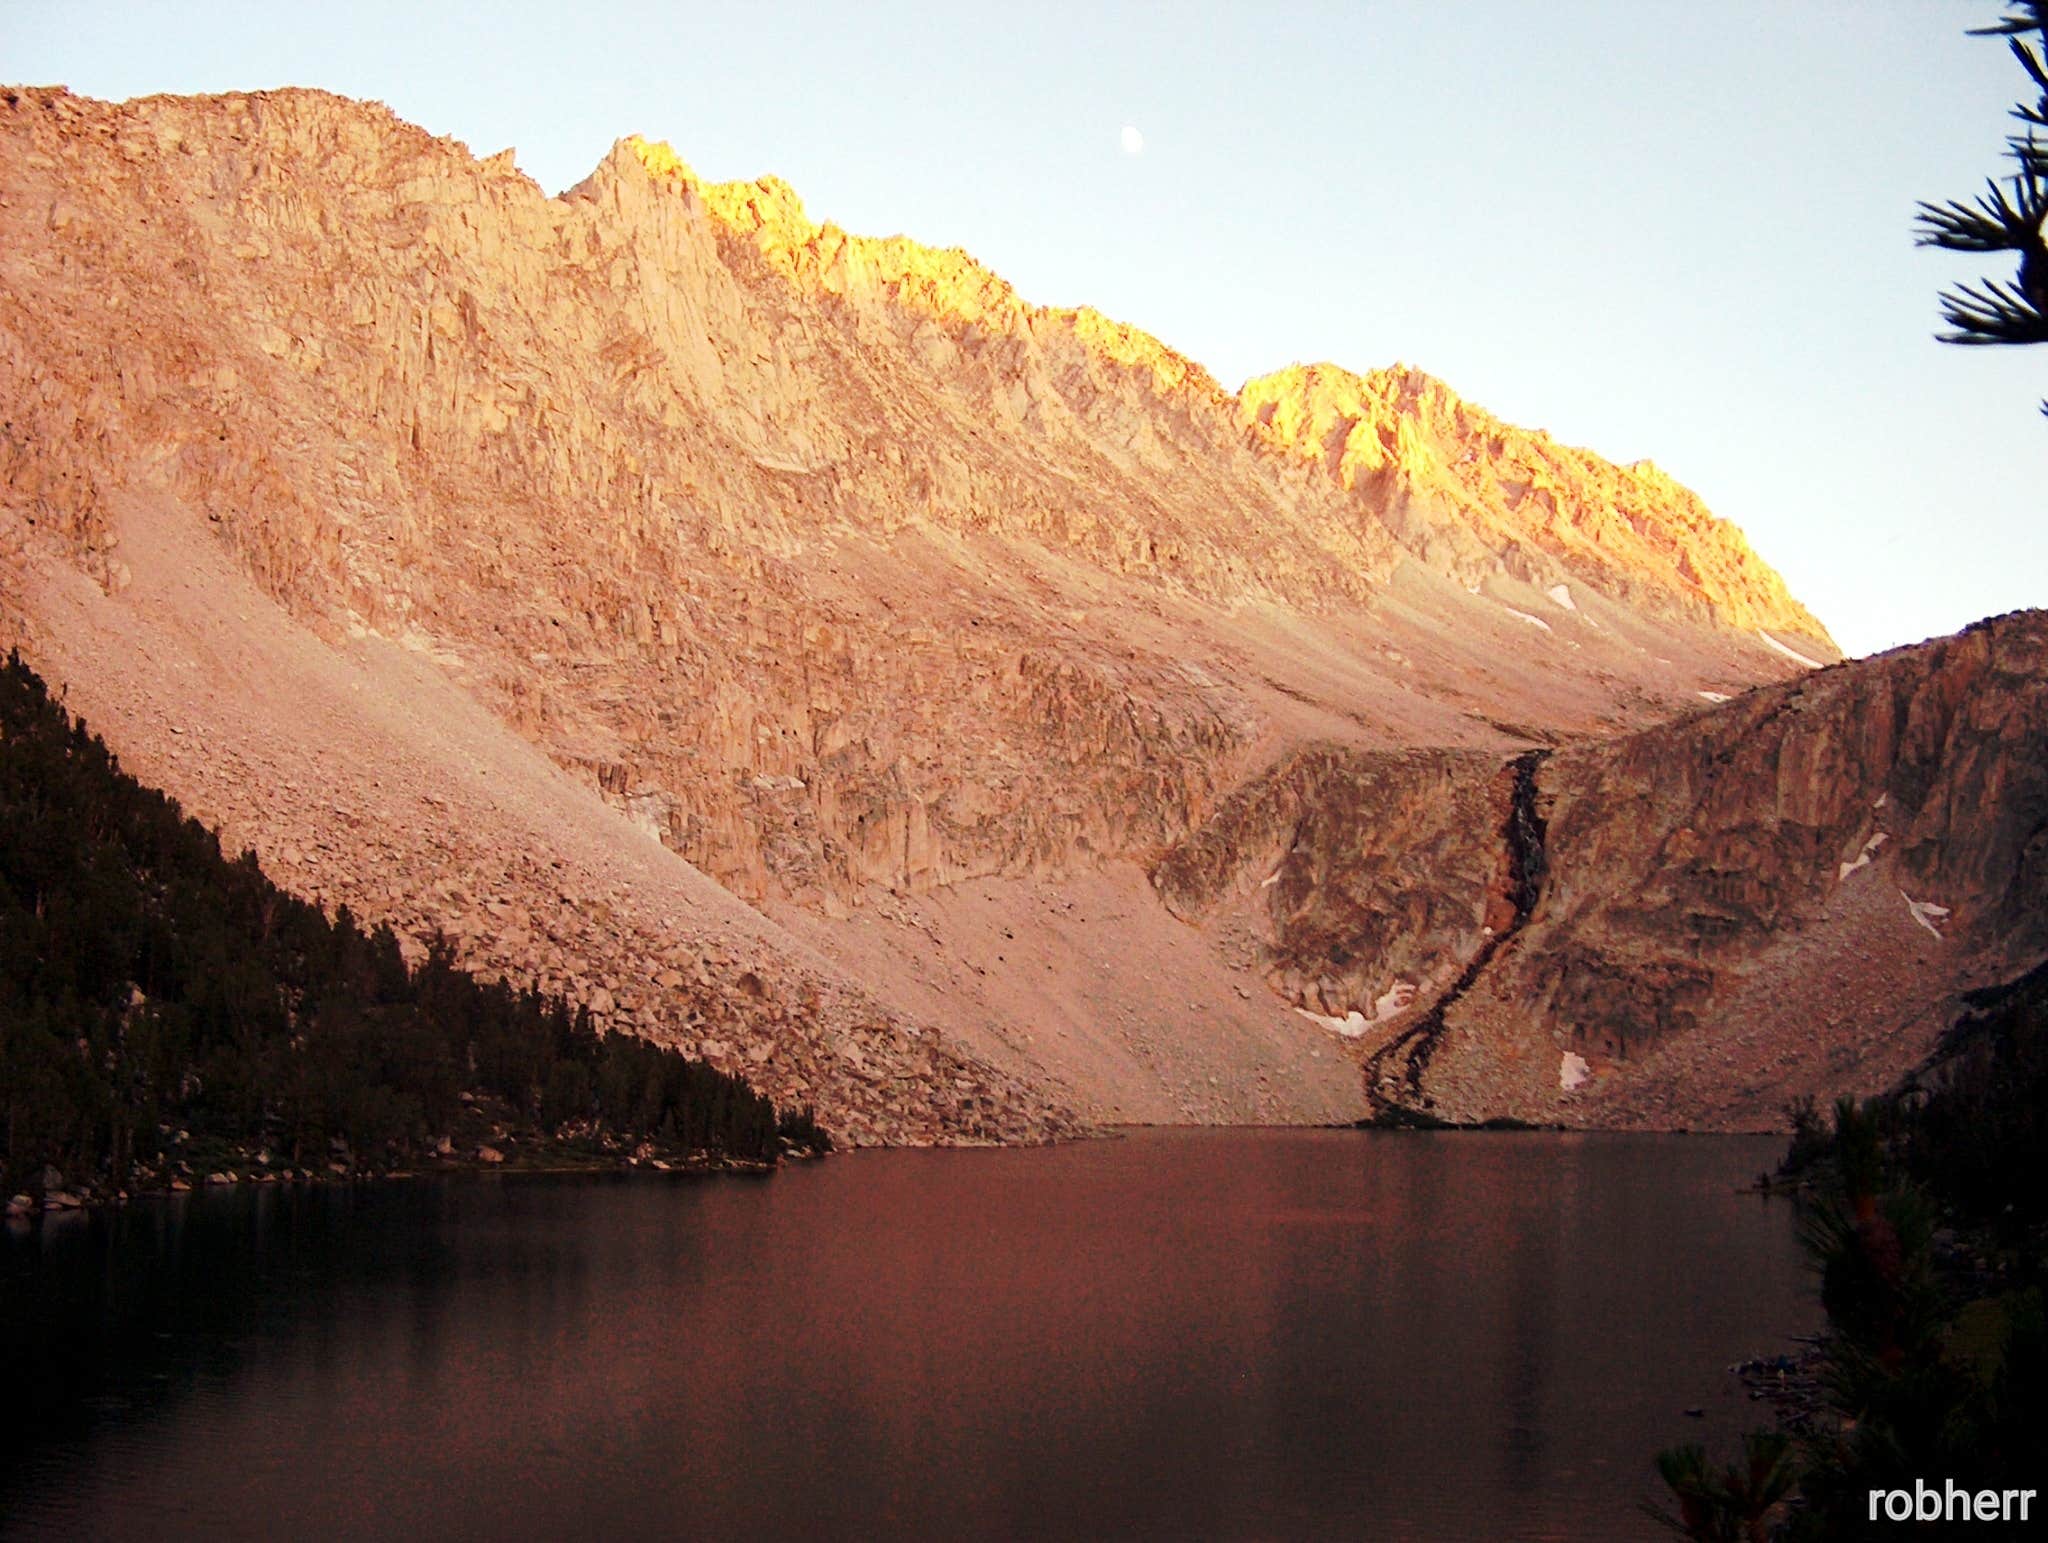 Camper submitted image from 4th Recess Lake - John Muir Wilderness - 2